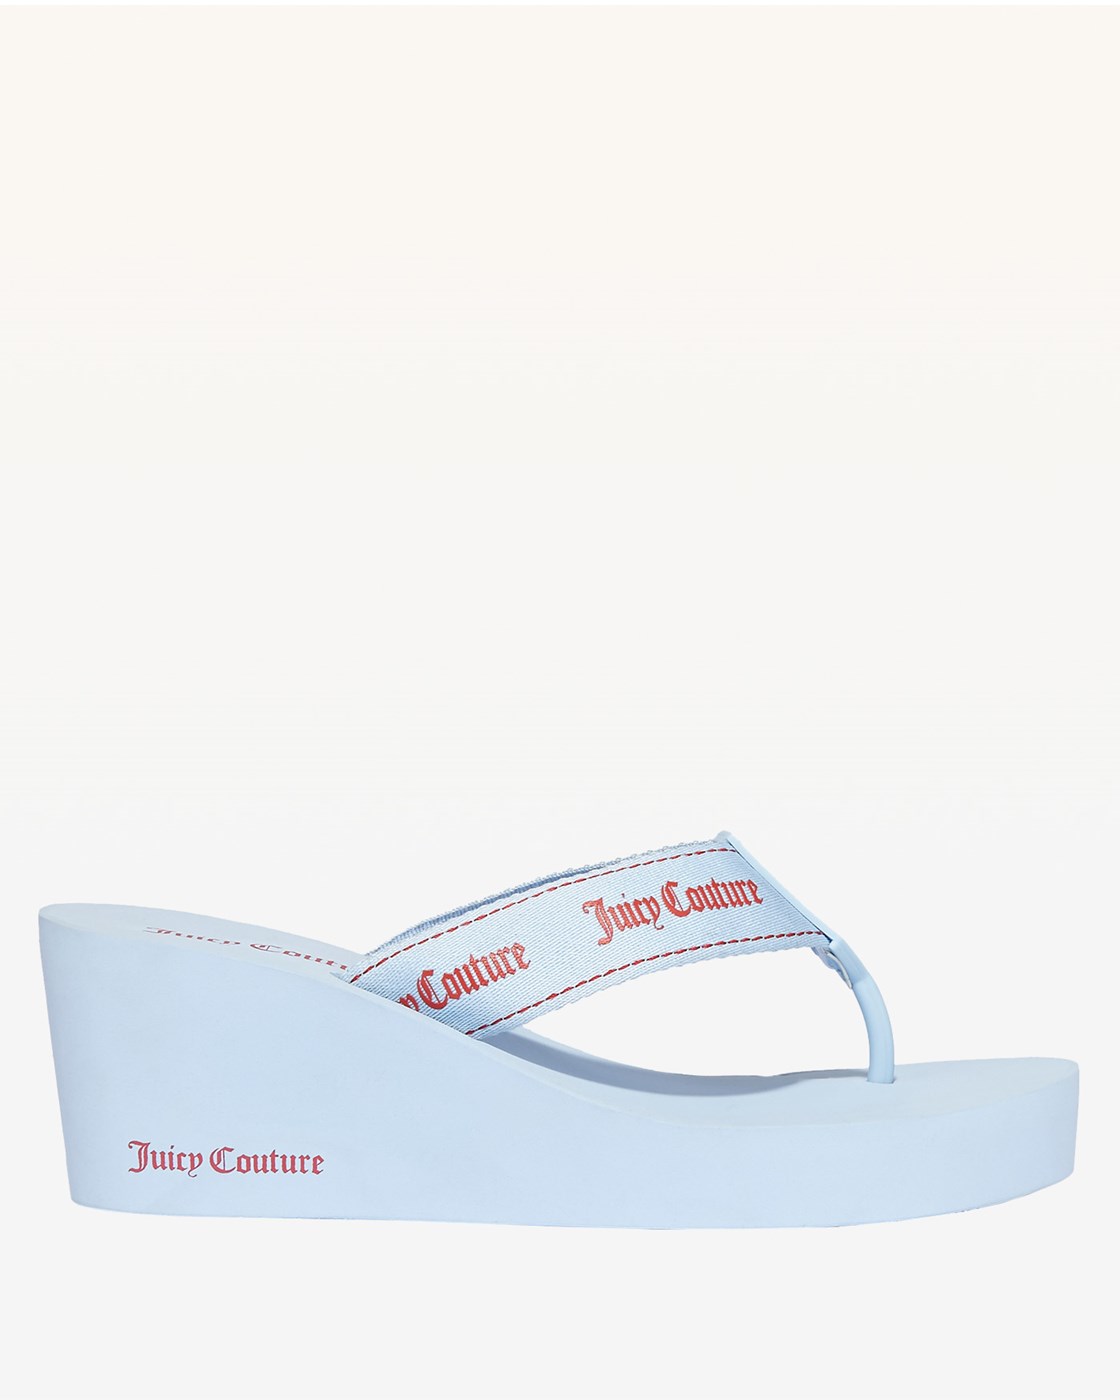 Juicy Couture Blue Chill Naomi Thong Wedge